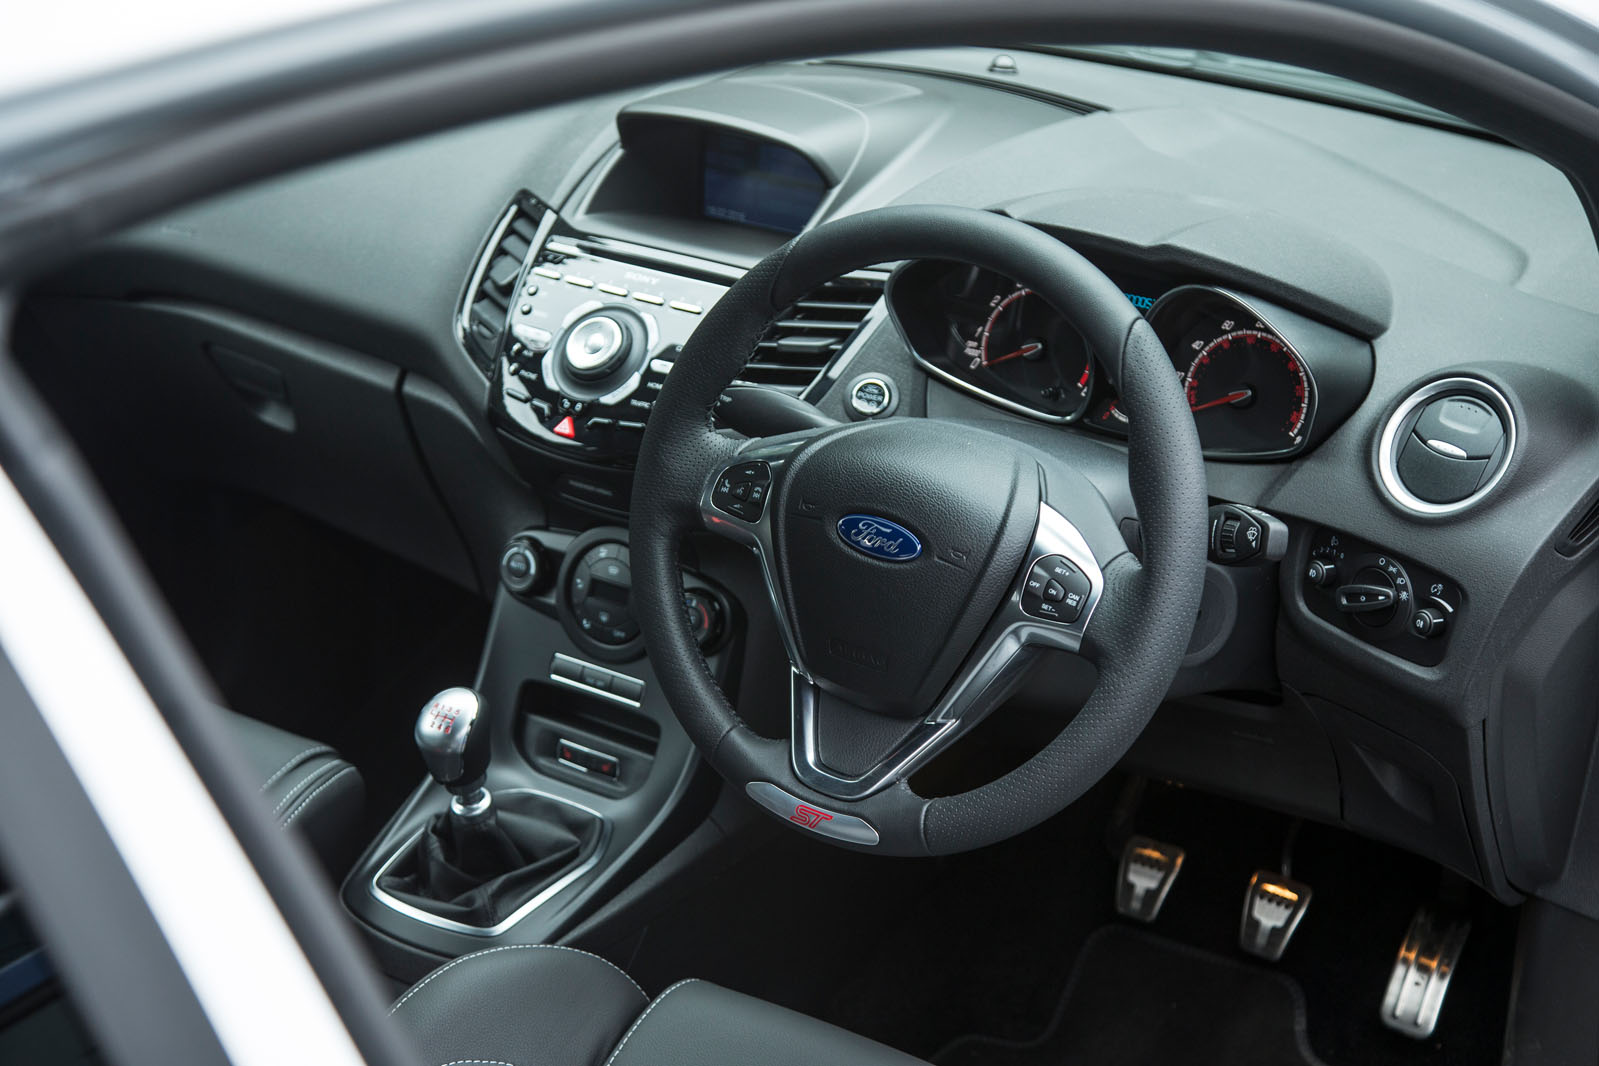 https://www.autocar.co.uk/sites/autocar.co.uk/files/images/car-reviews/first-drives/legacy/ford-fiesta-st-mk6-interior.jpg